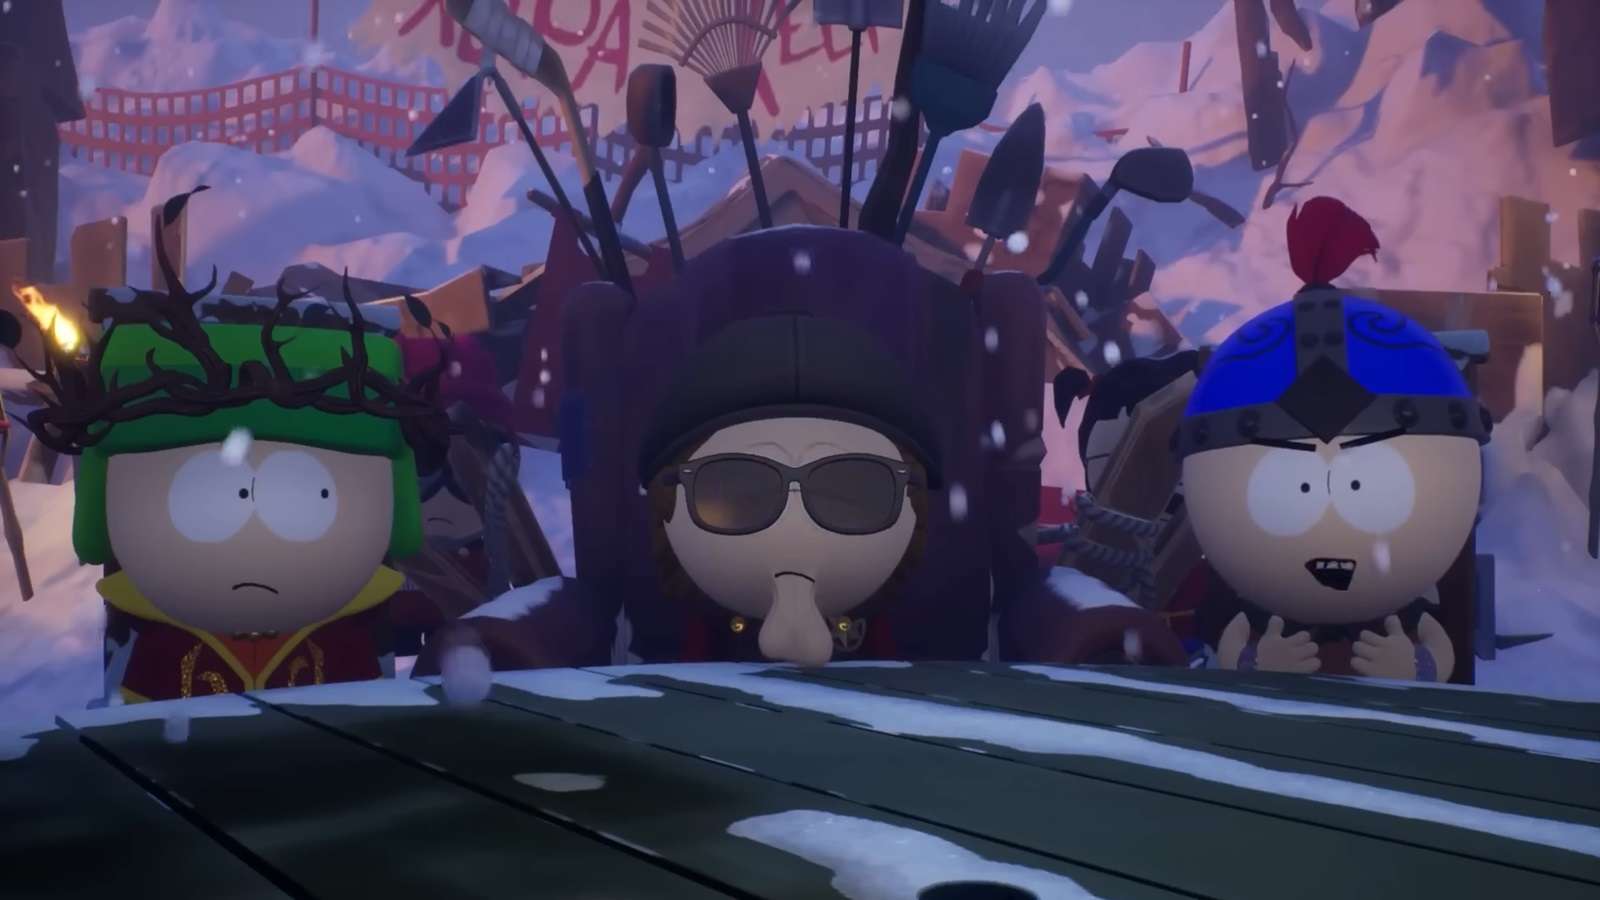 south park snow day screenshot with 3 characters